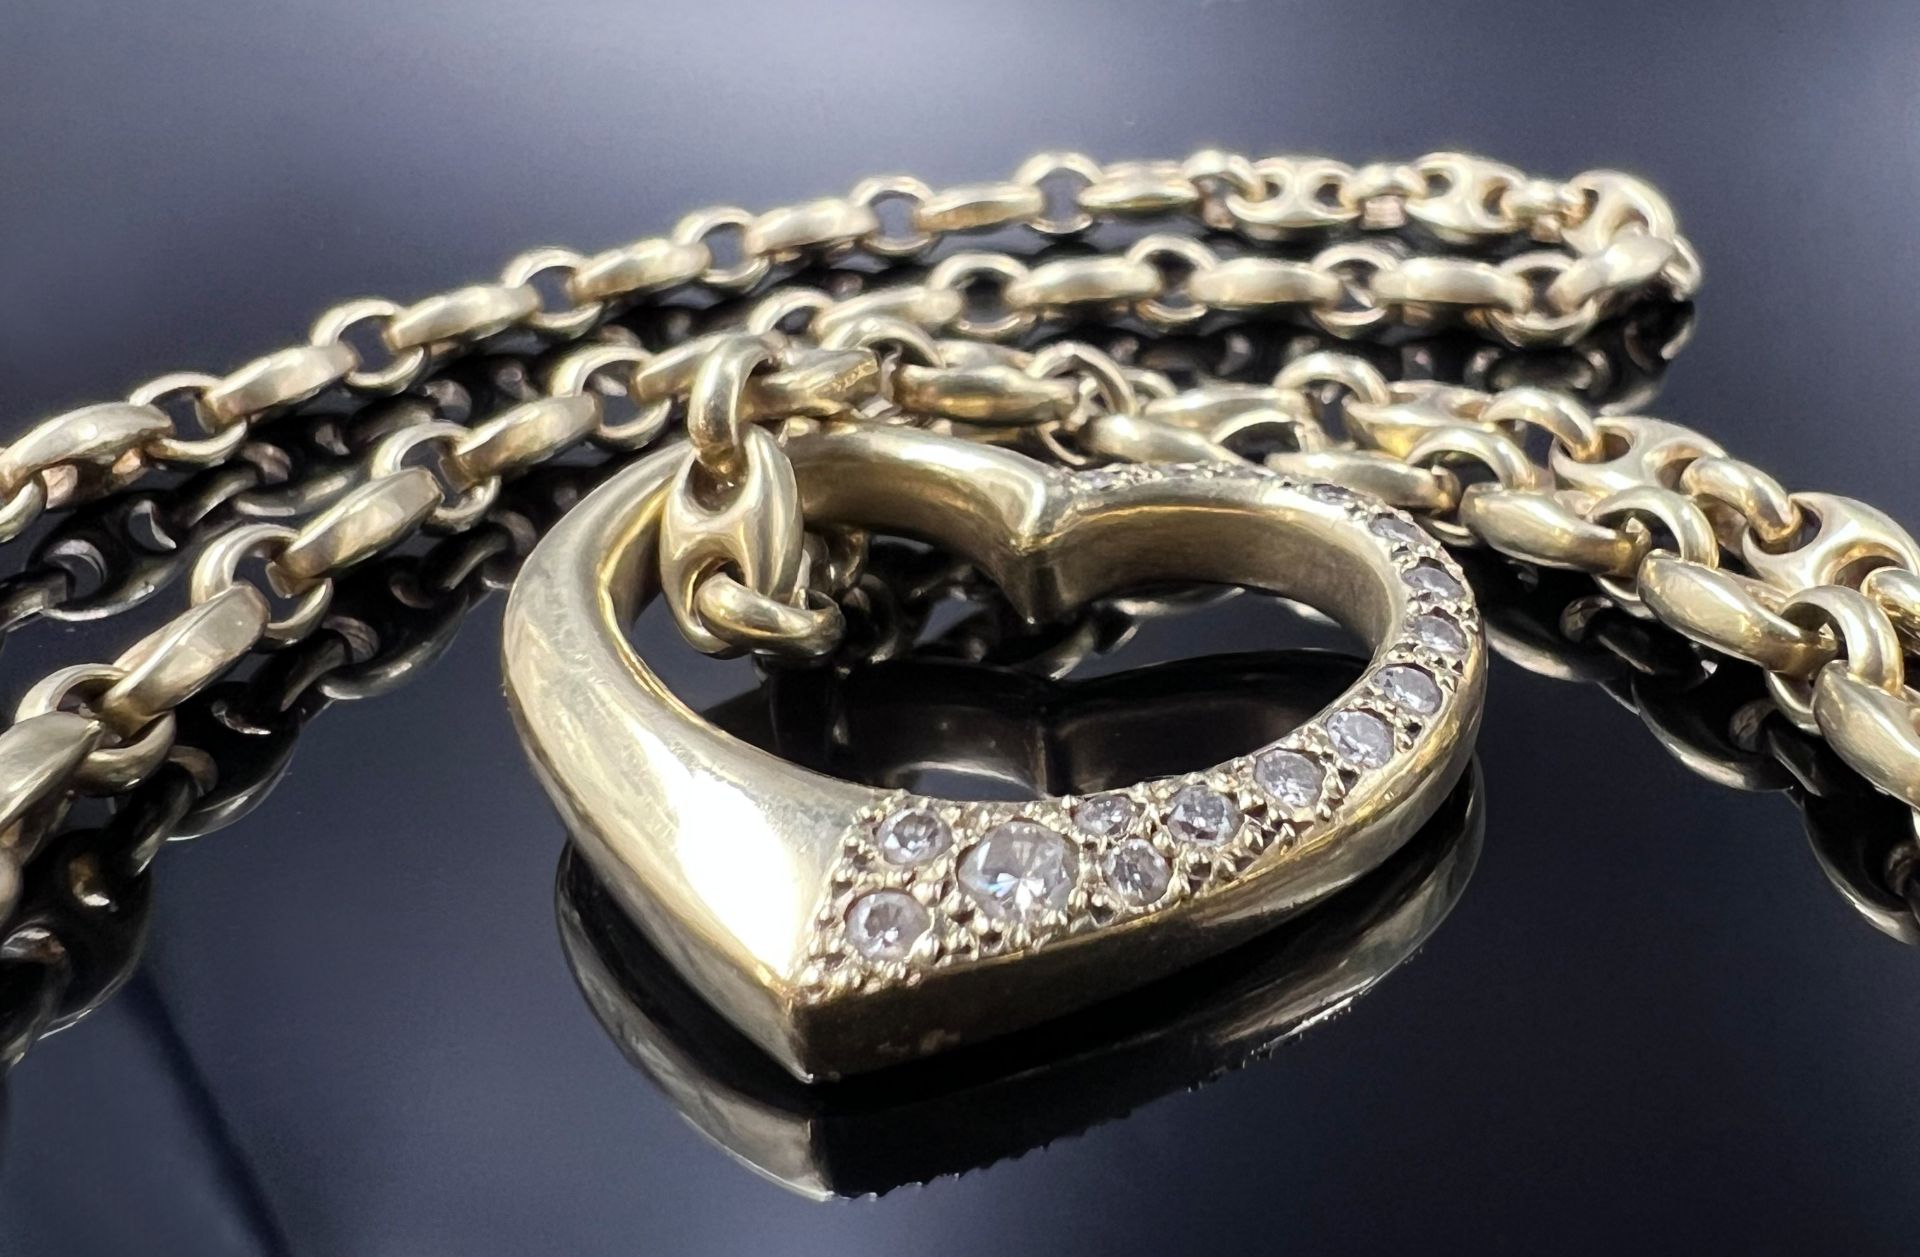 Heart-shaped pendant with necklace. 585 yellow gold with diamonds. - Image 3 of 6